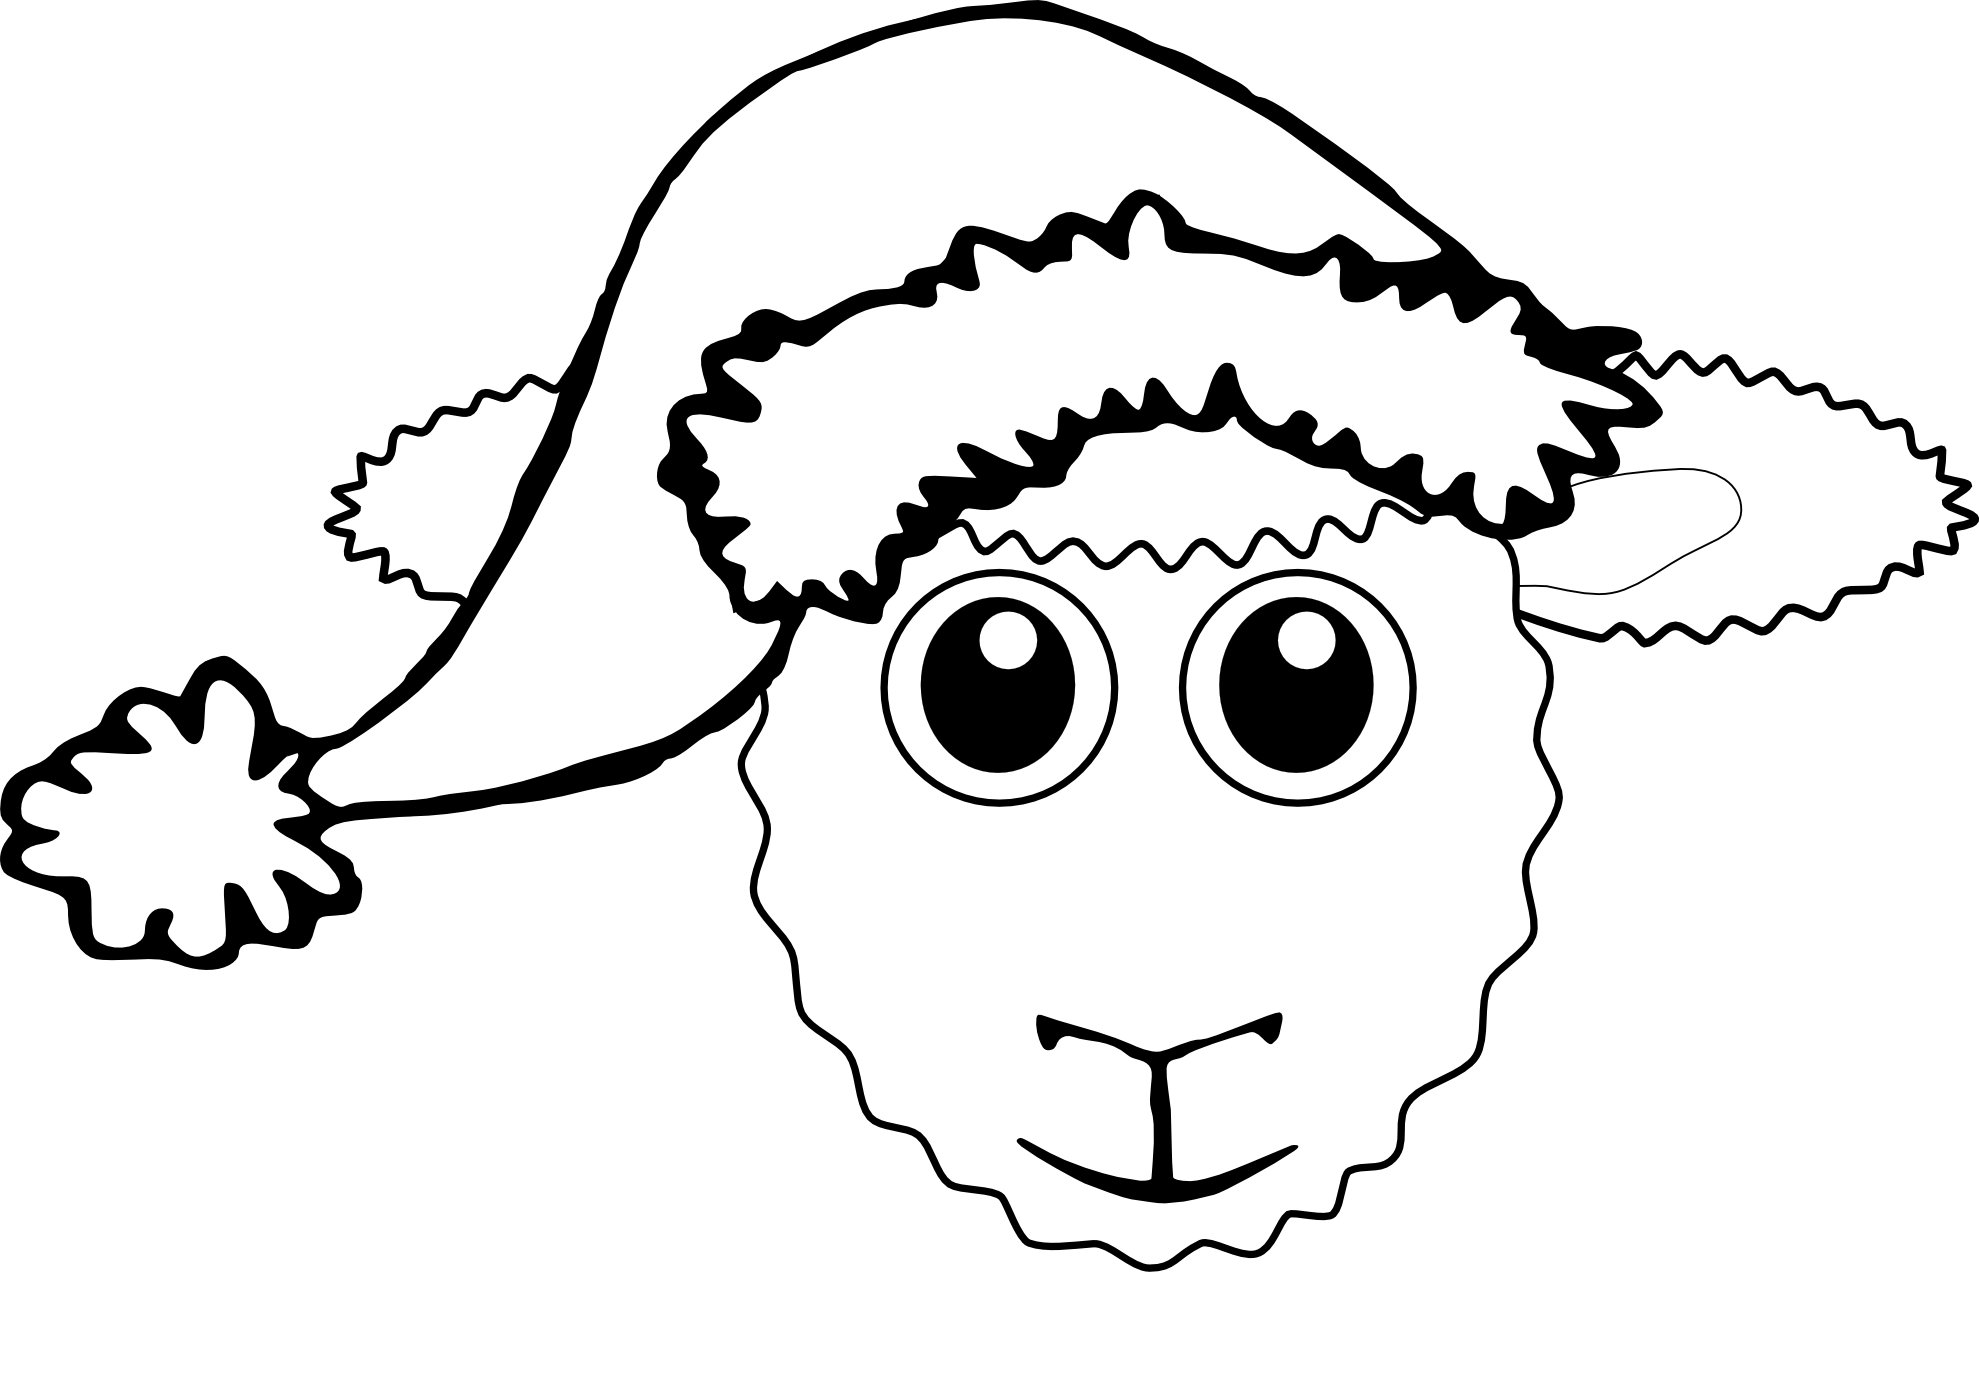 Sheep christmas hat clipart 